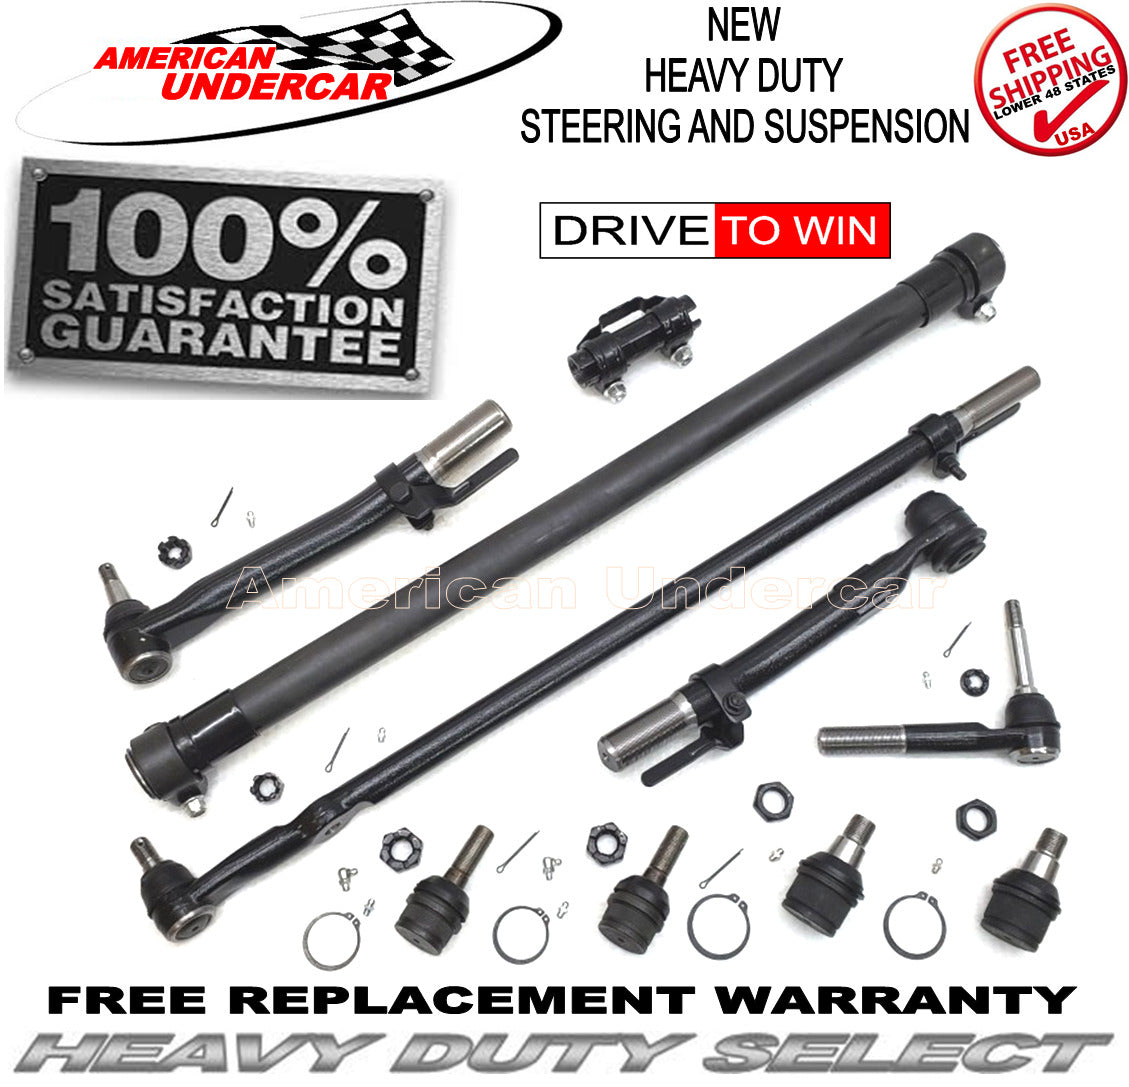 HD Ball Joint Drag Link Tie Rod Link Steering Kit 11-16 Ford F250 F350 4x4 SRW